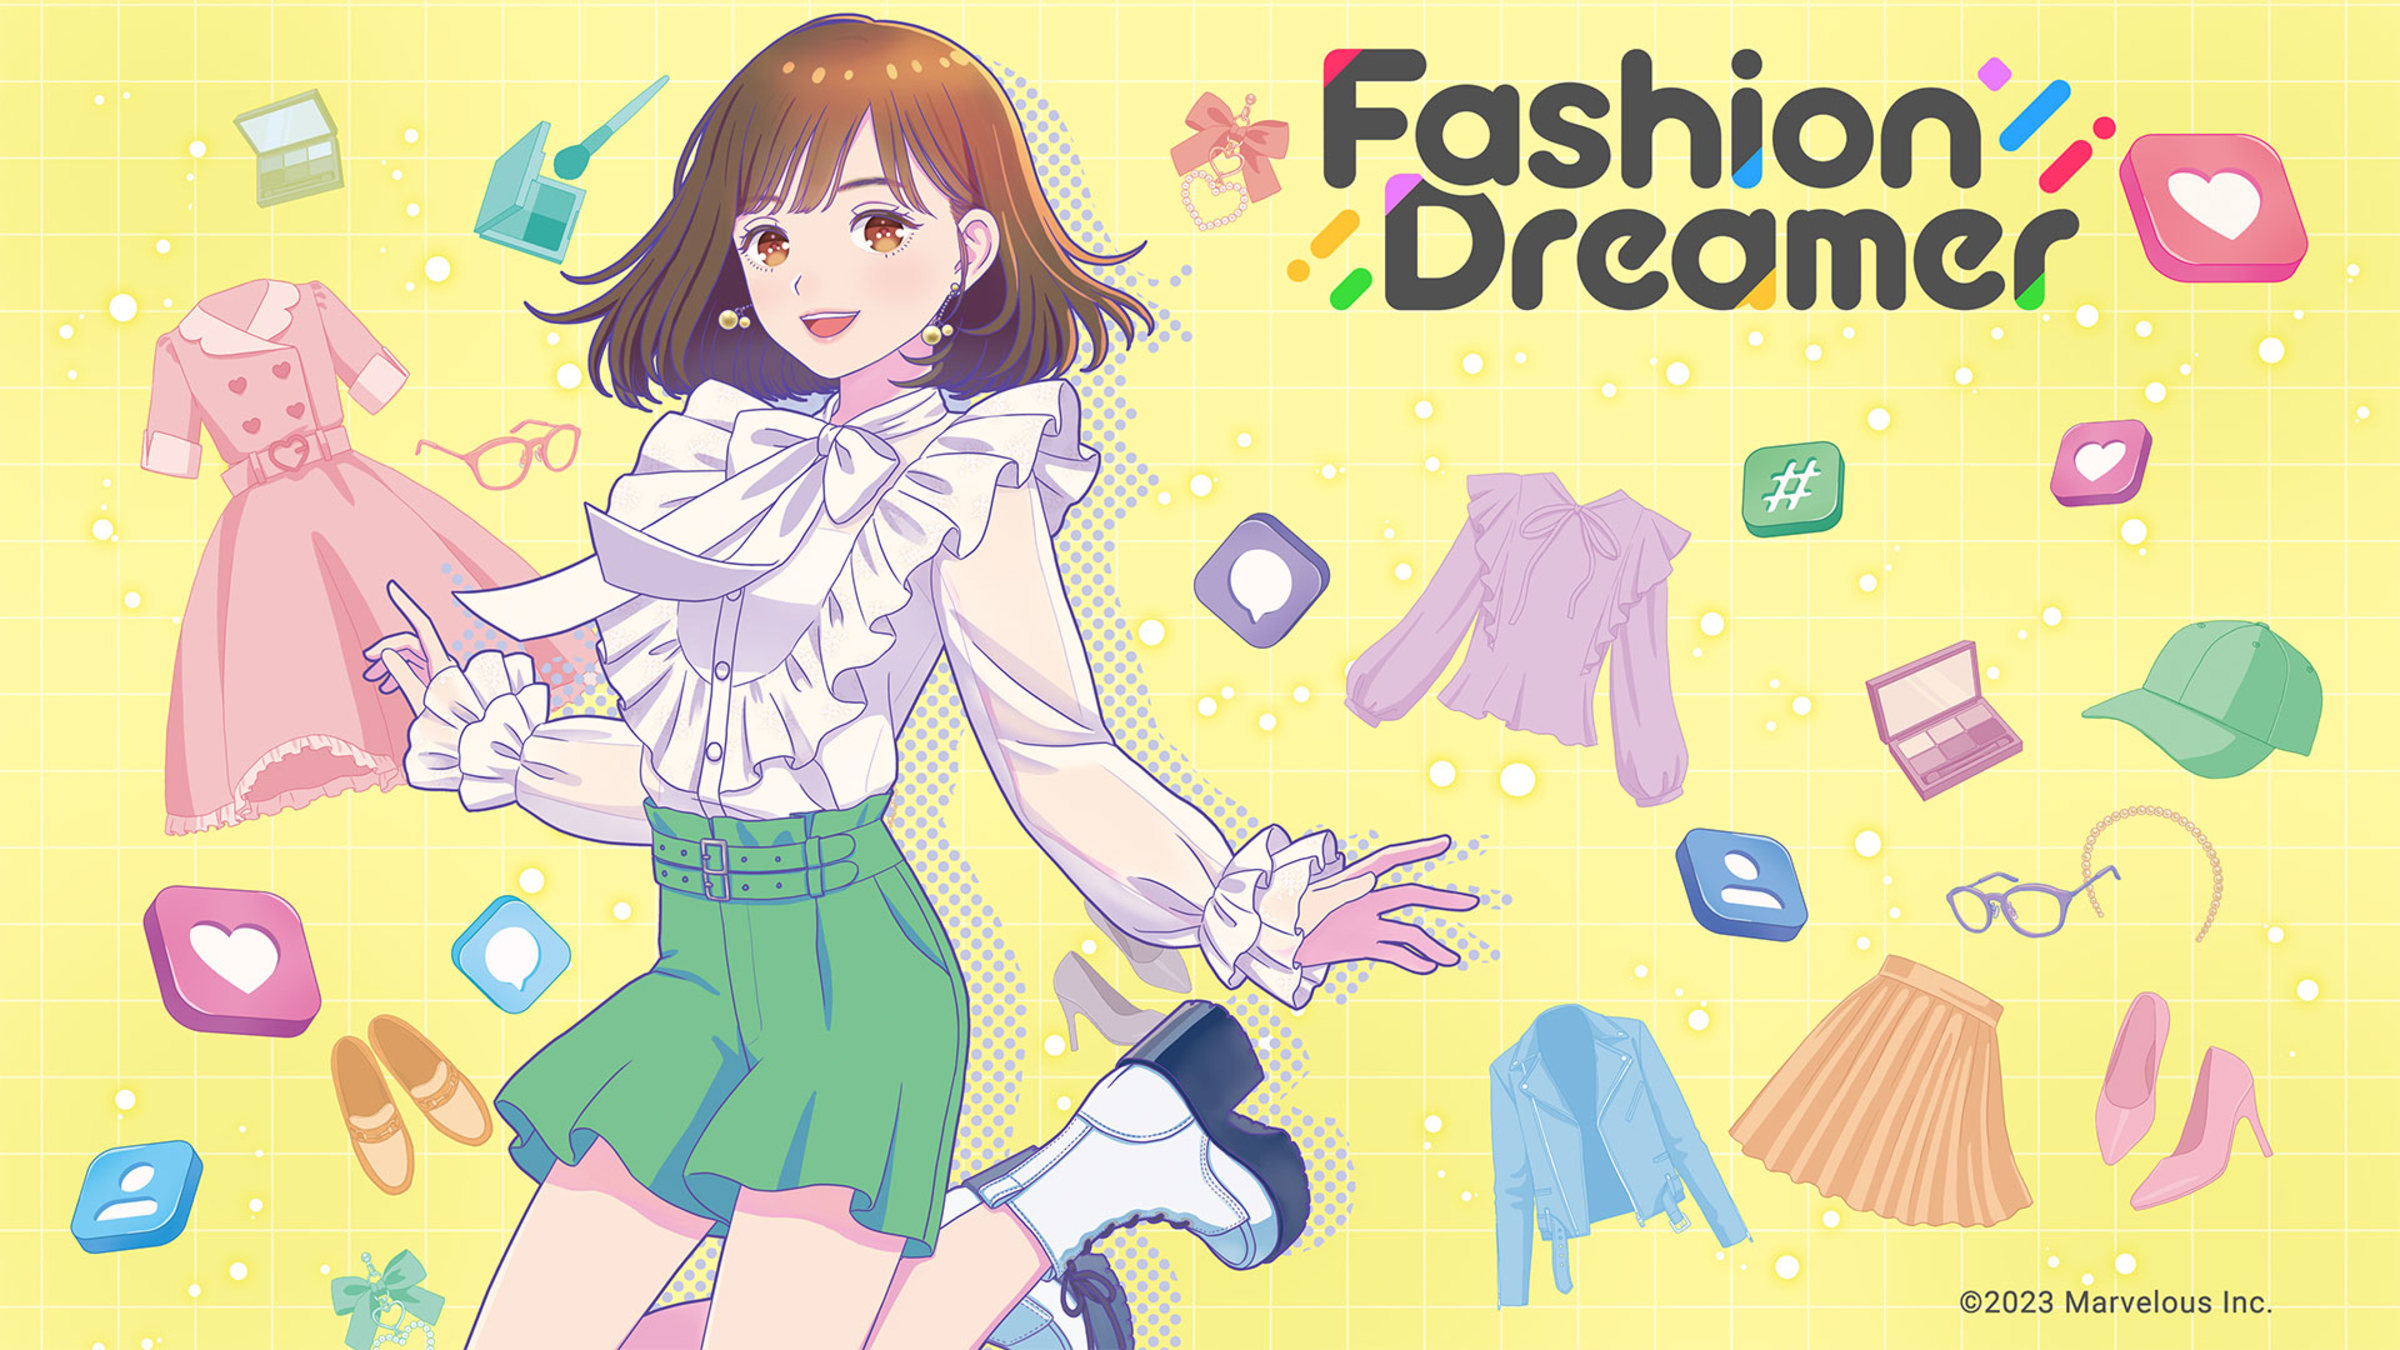 Build Your Own Brand and Become the Ultimate Influencer in Fashion Dreamer,  Coming to Nintendo Switch in 2023